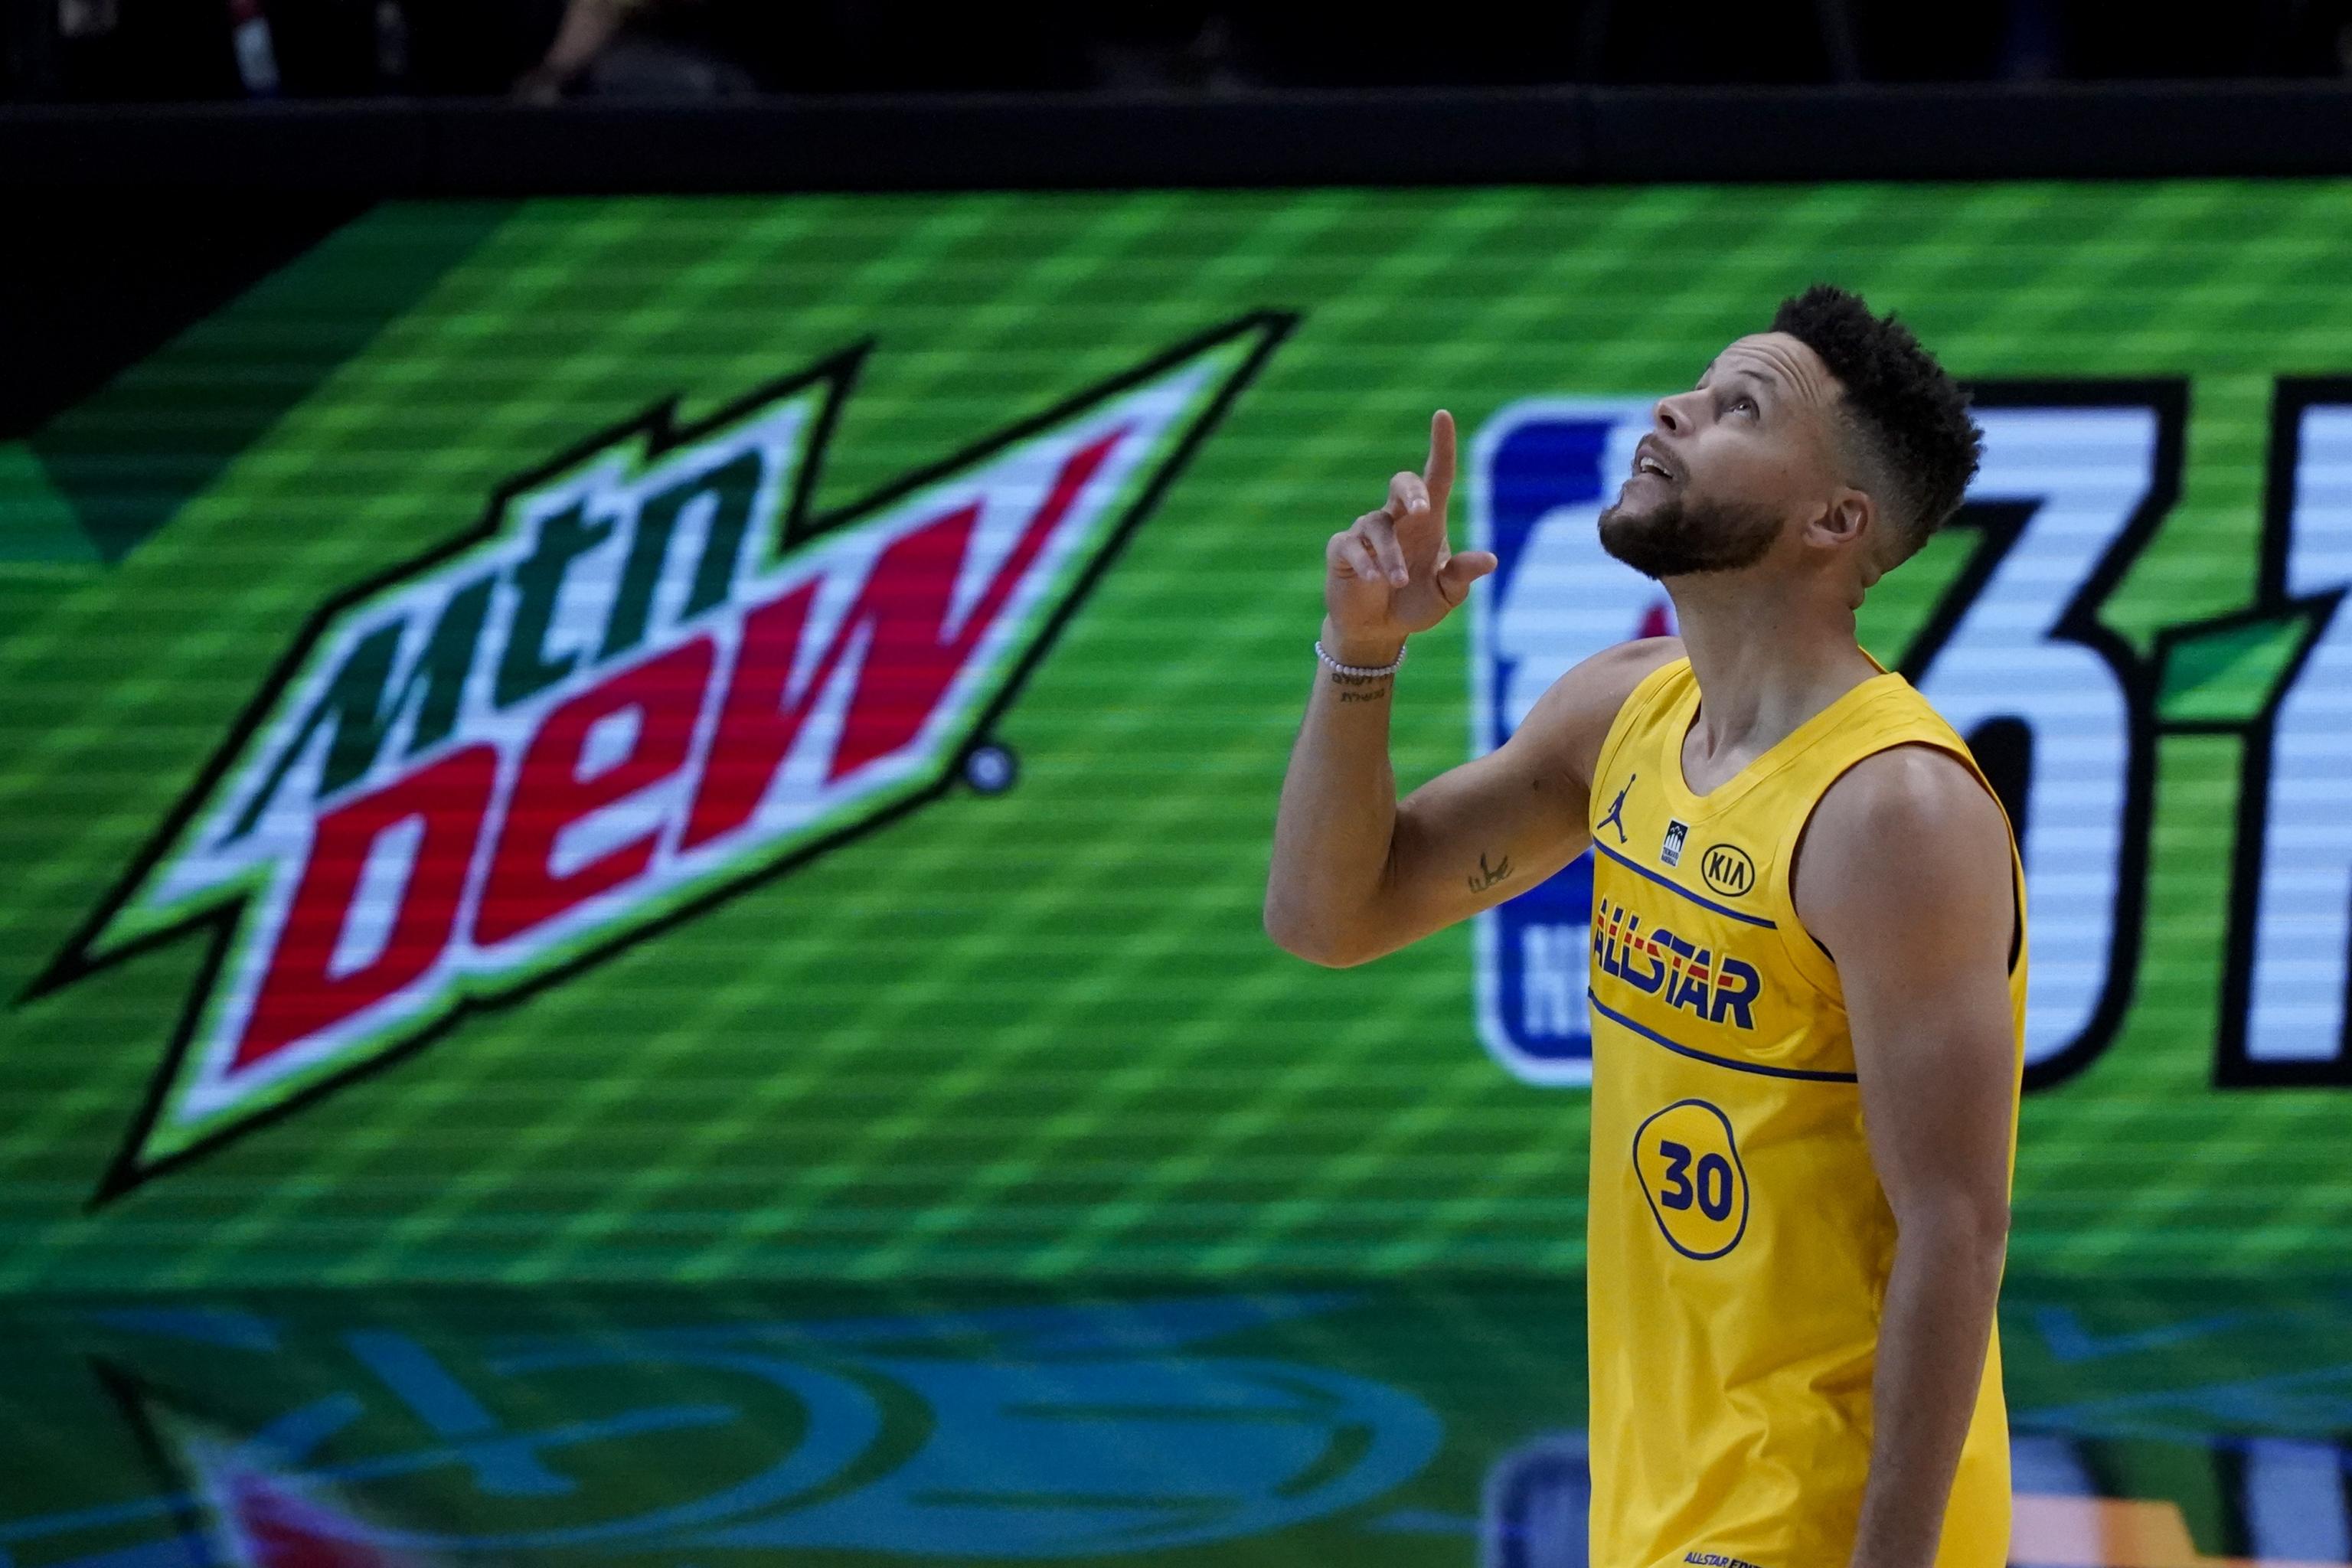 Stephen Curry wins the NBA 3-Point Contest in an absolute thriller